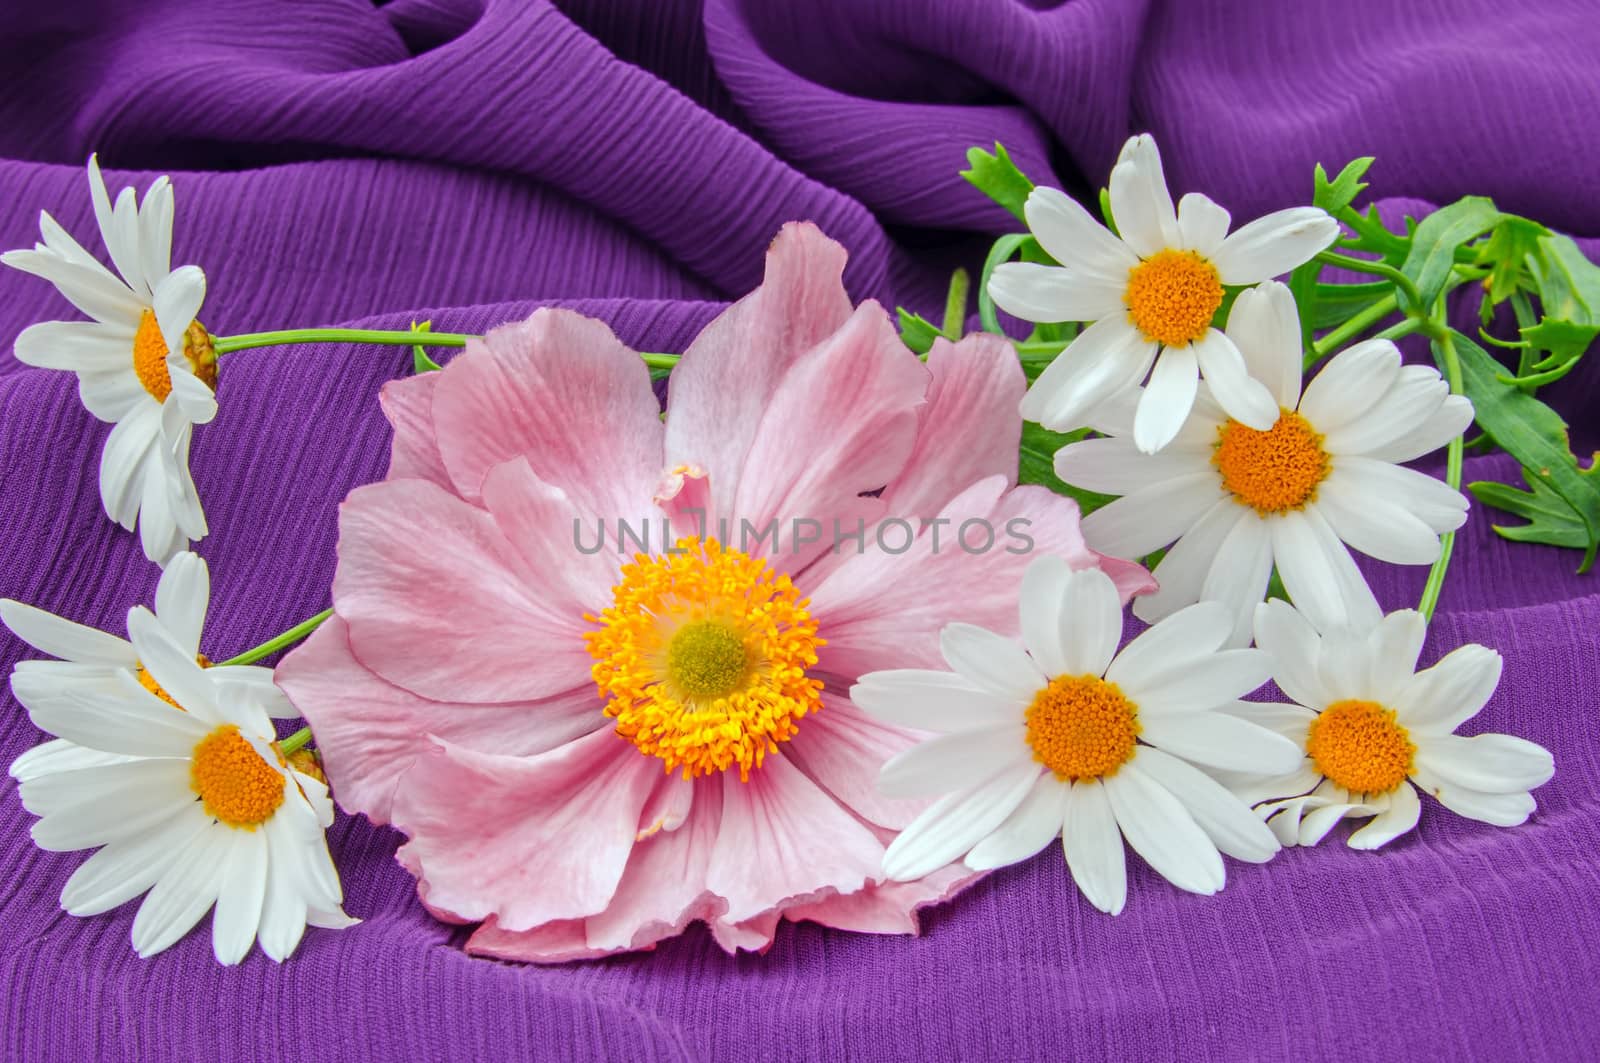 Pink japanese anmemone and white marguerites on purple fabric